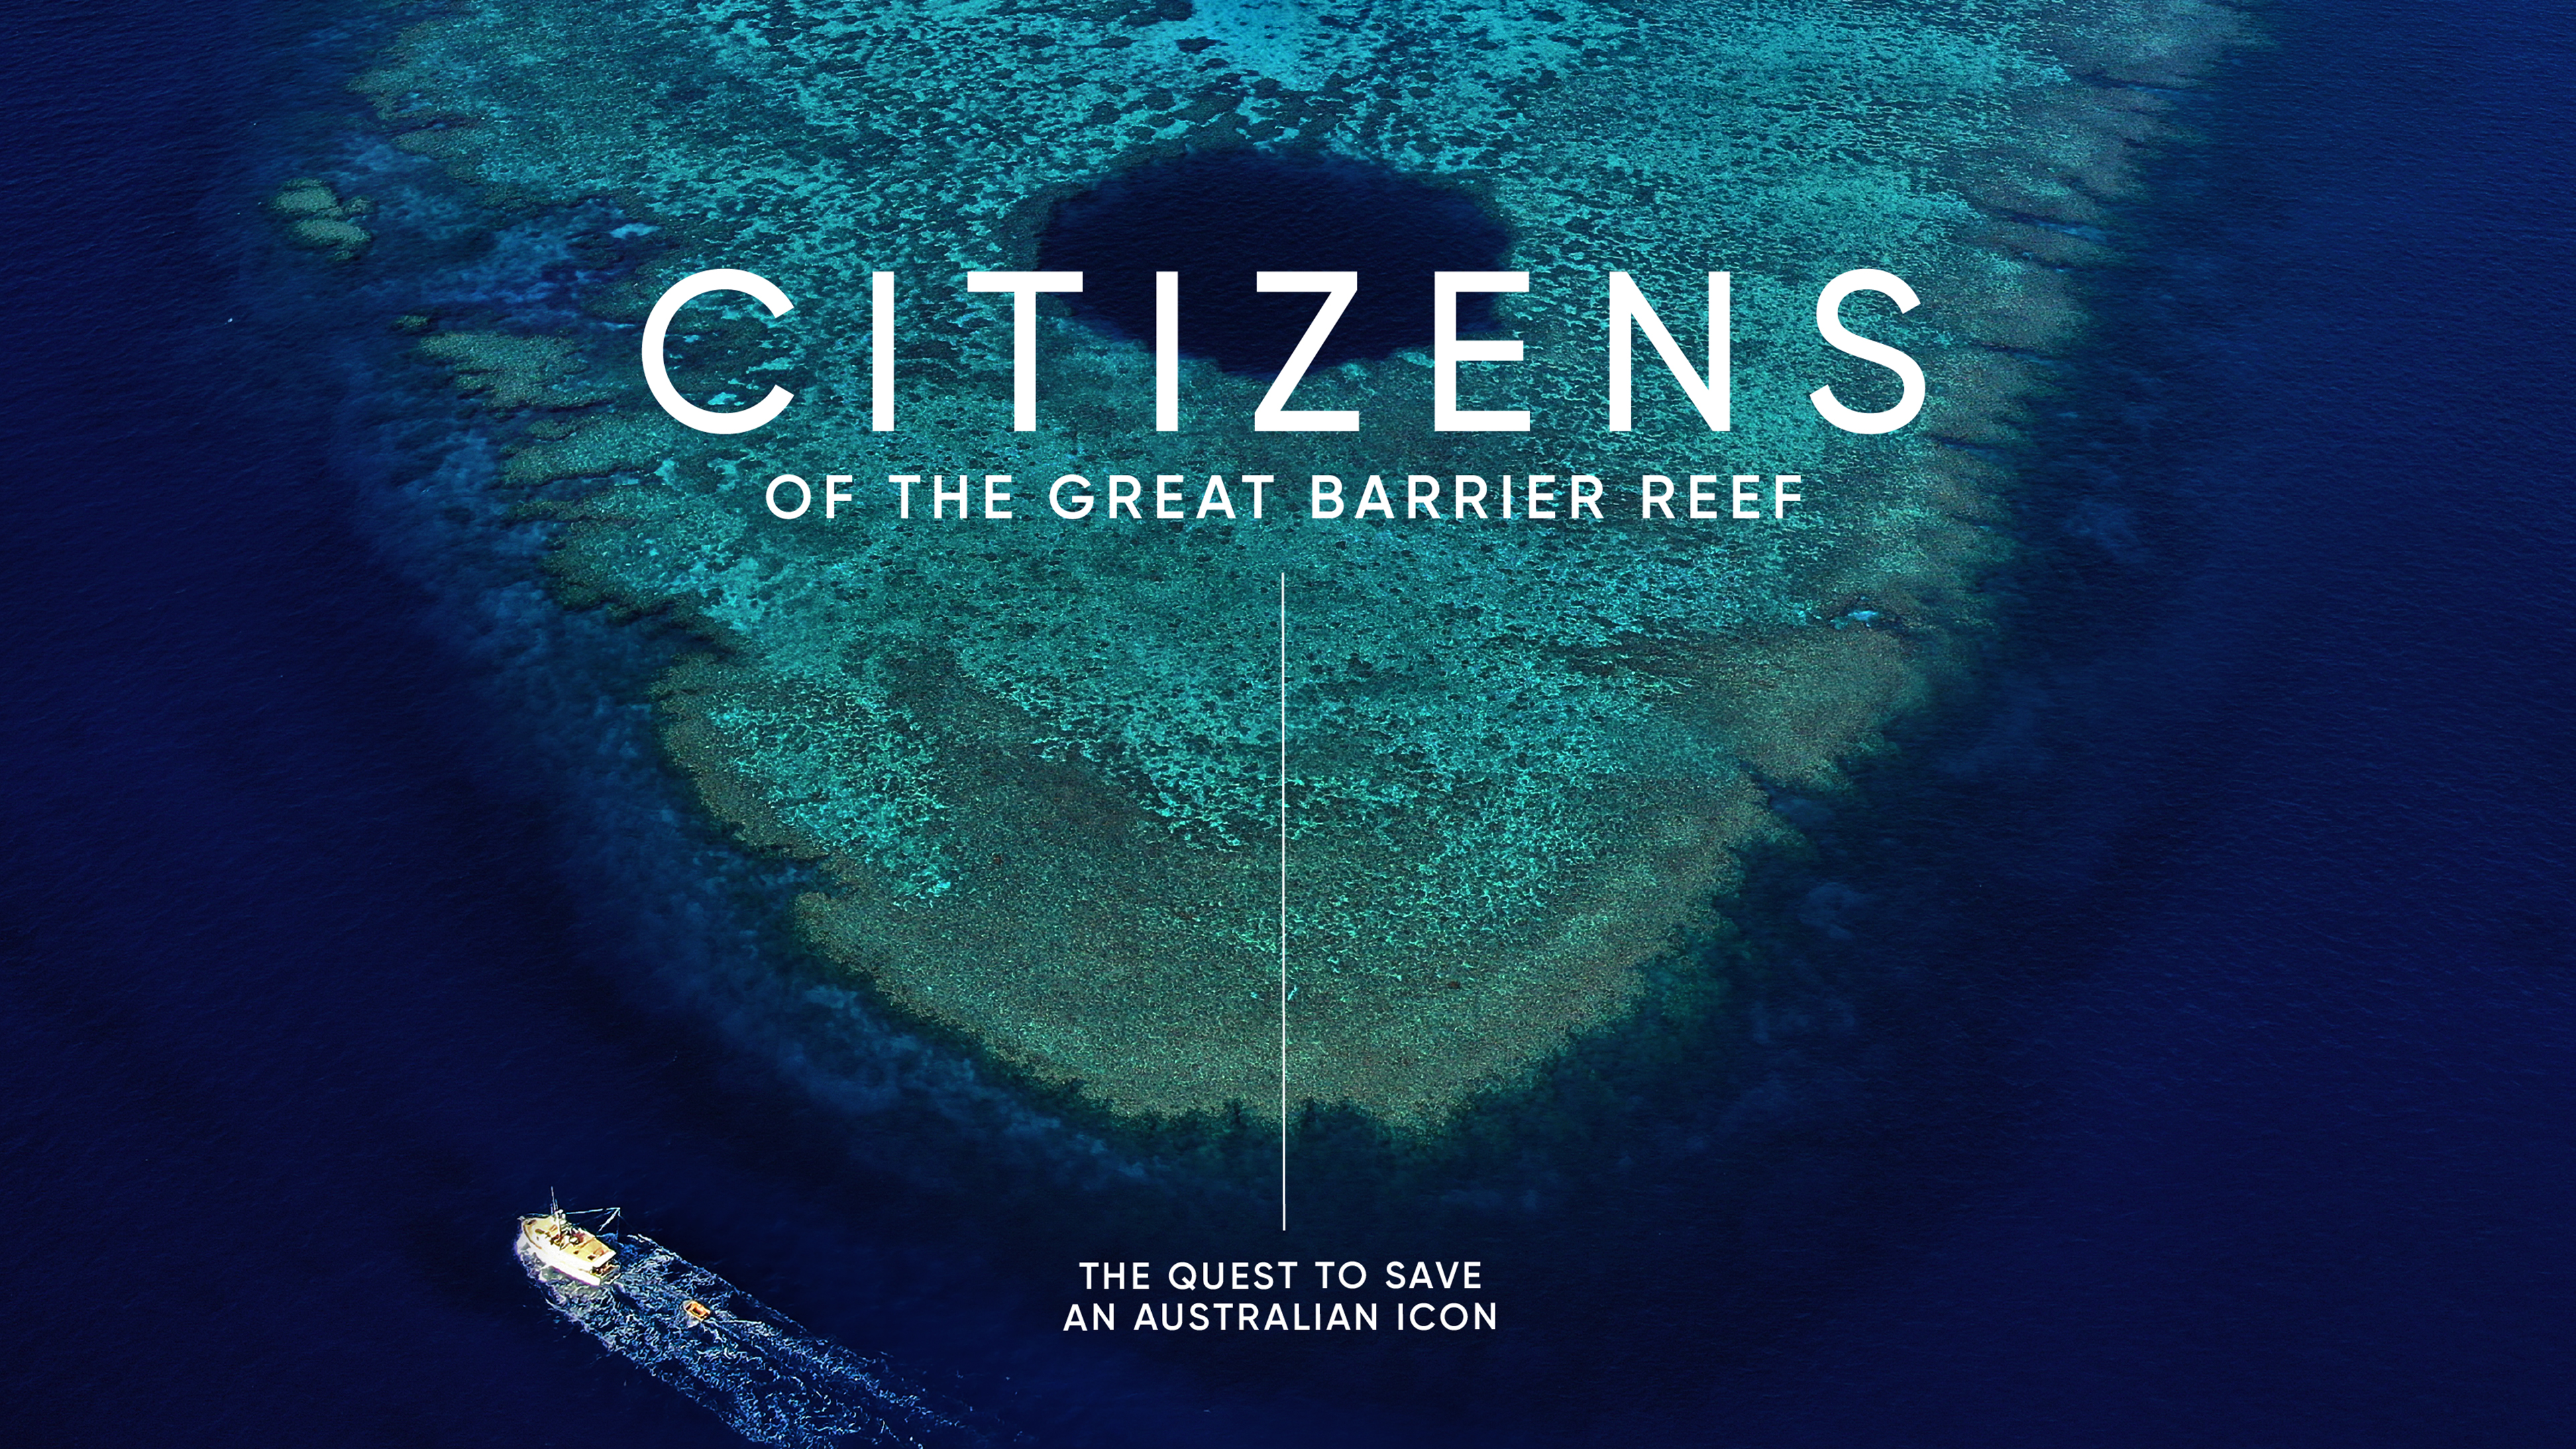 The rounded edge of a turquoise seabed stands out among the dark blue ocean. To the left, a white boat sails through the water. White Text: Citizens of the Great Barrier Reef. The quest to save an Australian icon.